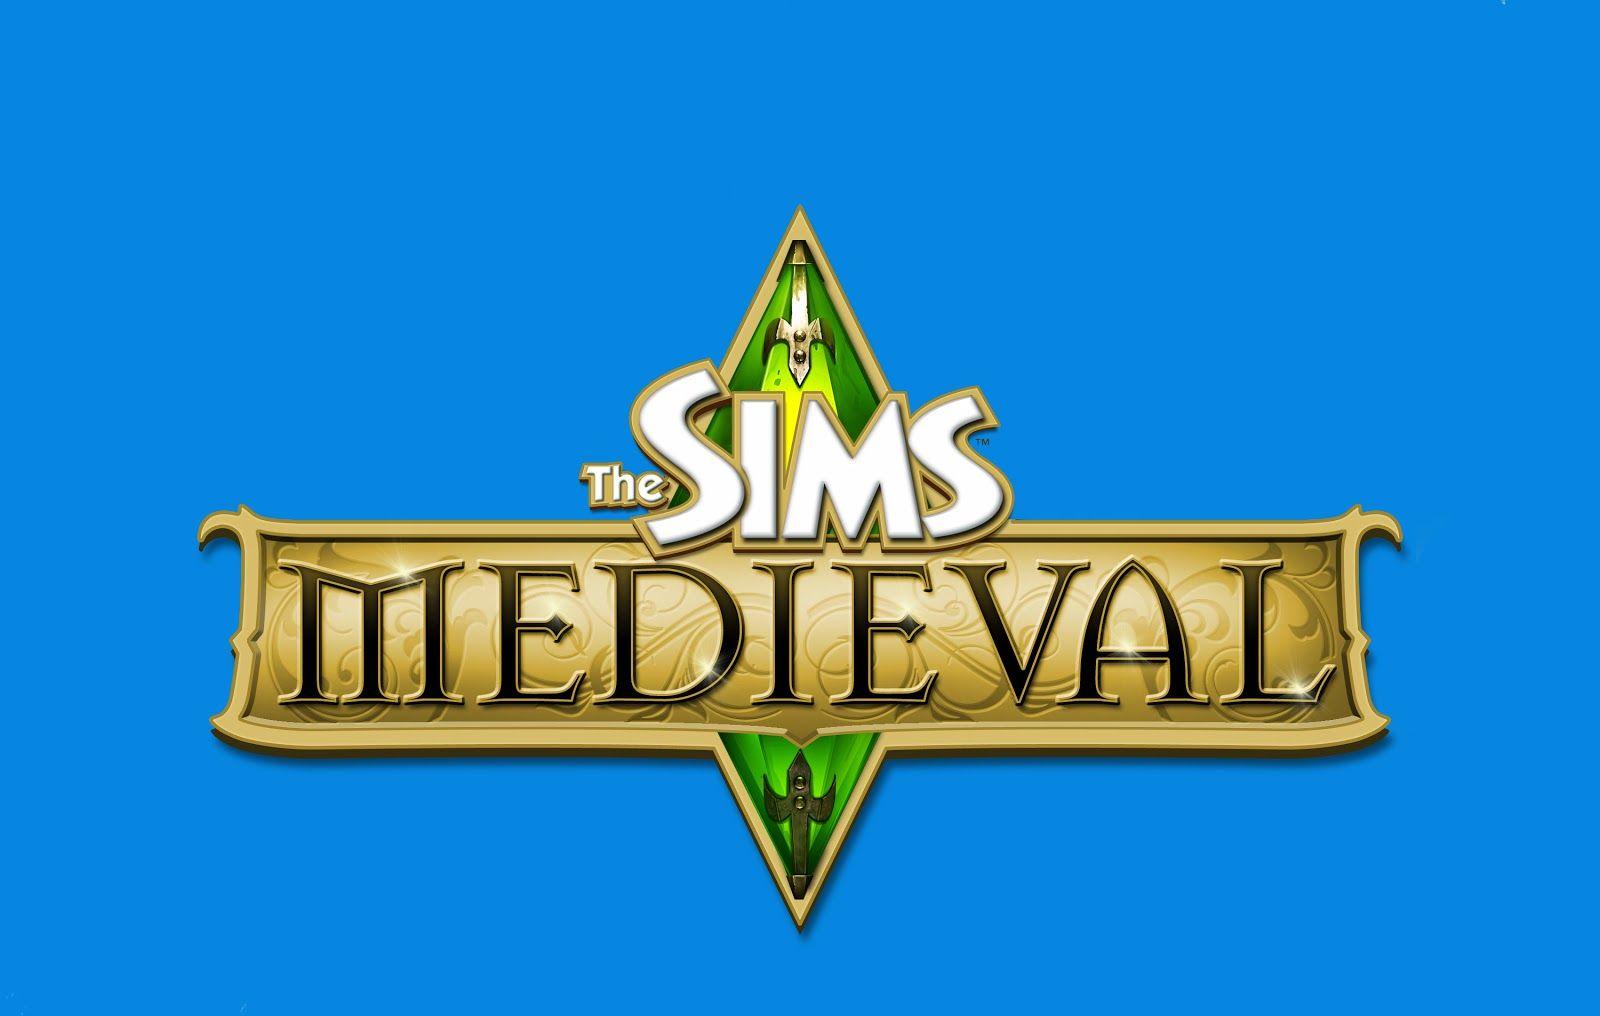 Central Wallpaper: The Sims Medieval HD Wallpaper